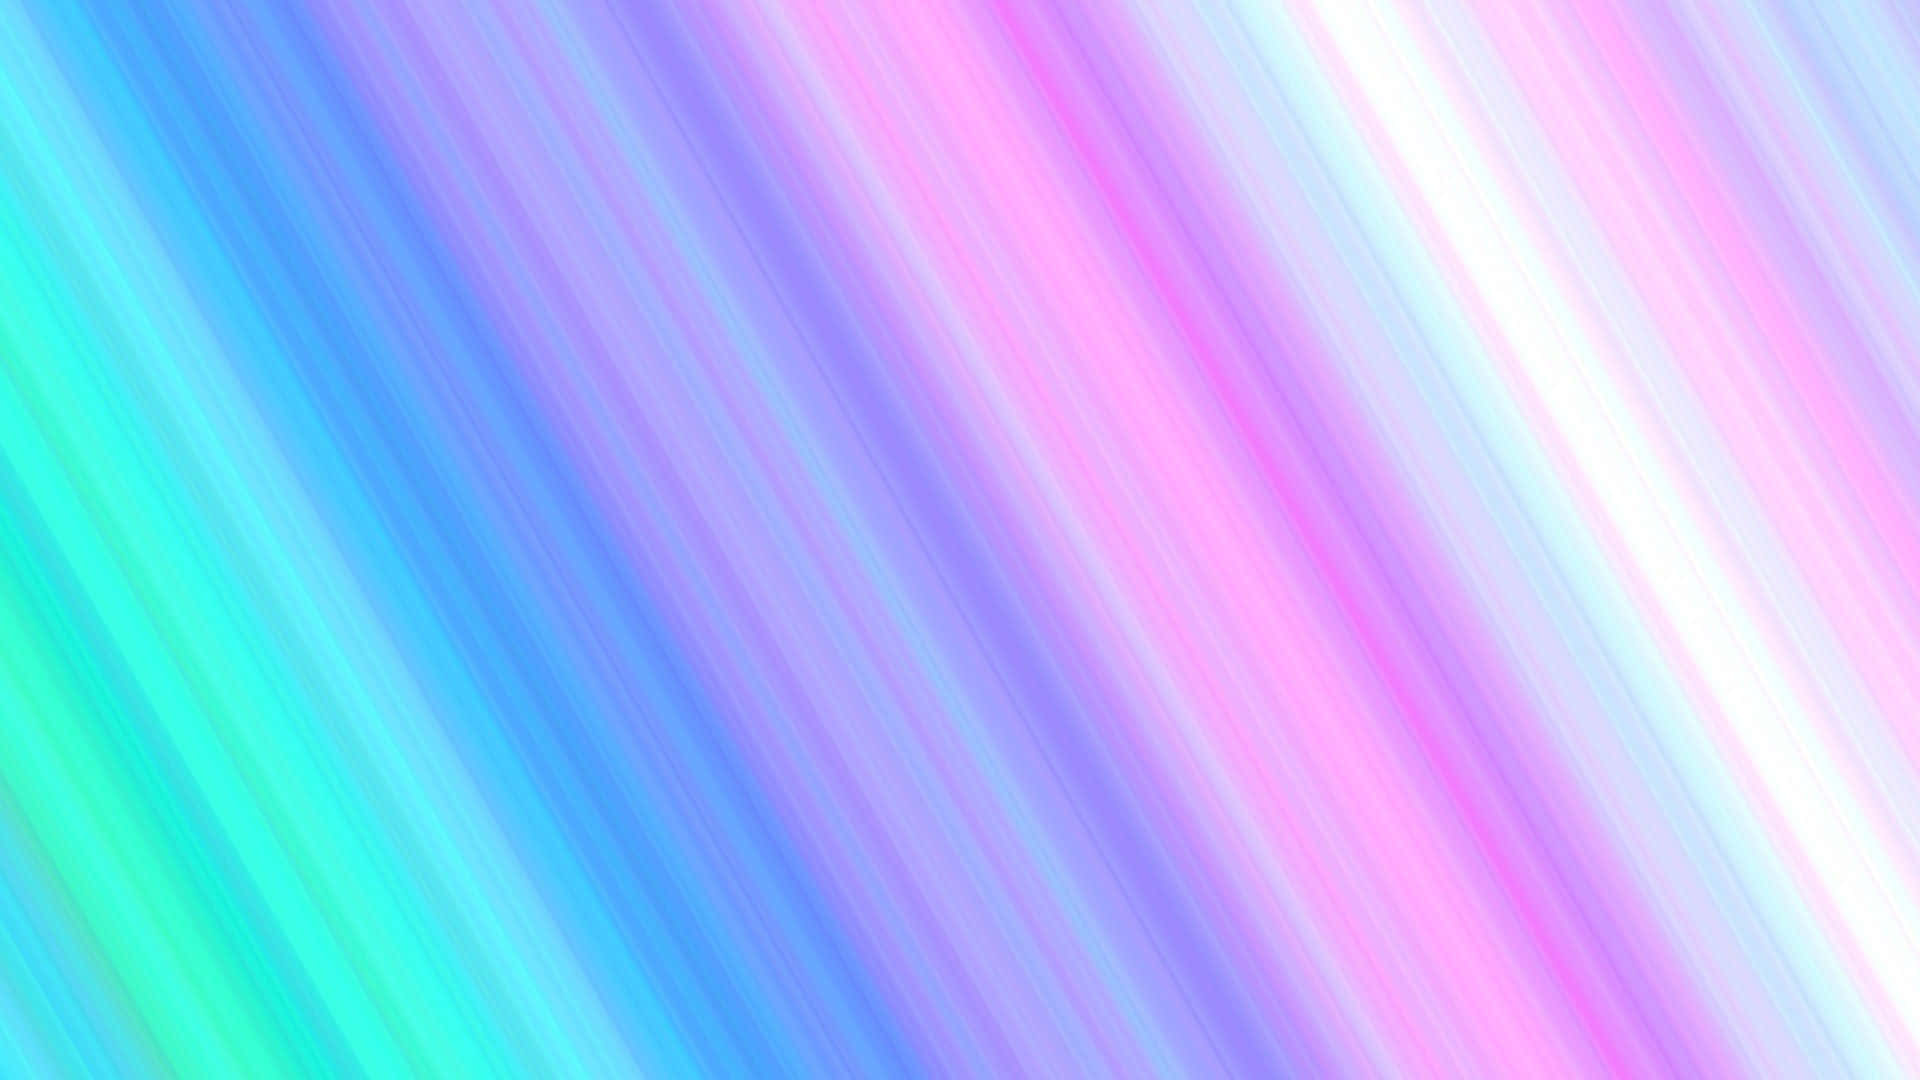 2048 pixels wide and 1152 pixels tall colorful wallpaper